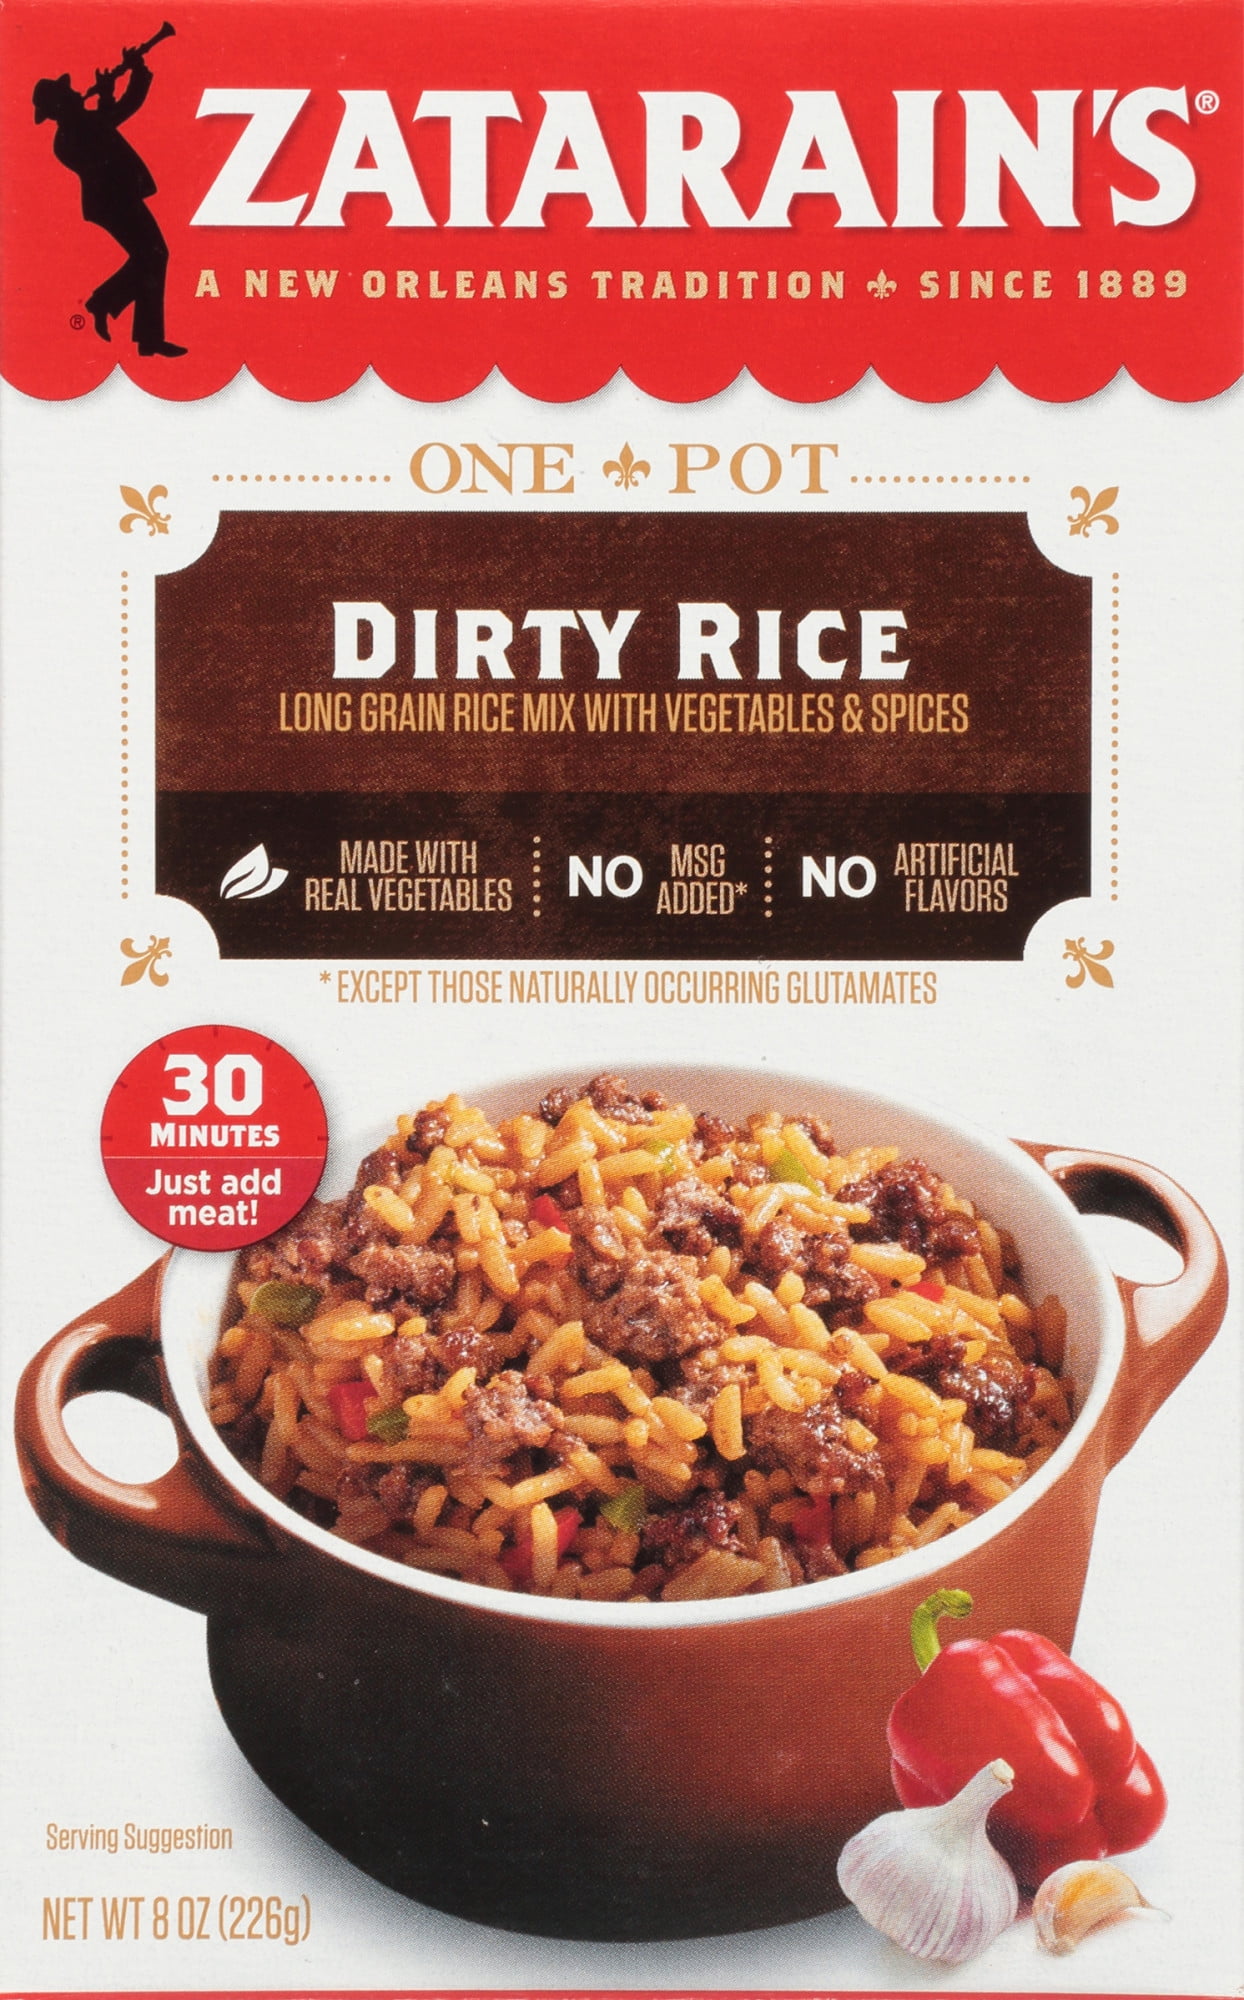 Zatarain's Rice Mixes from $1 Shipped on  (Easy Subscribe & Save  Filler Item!)